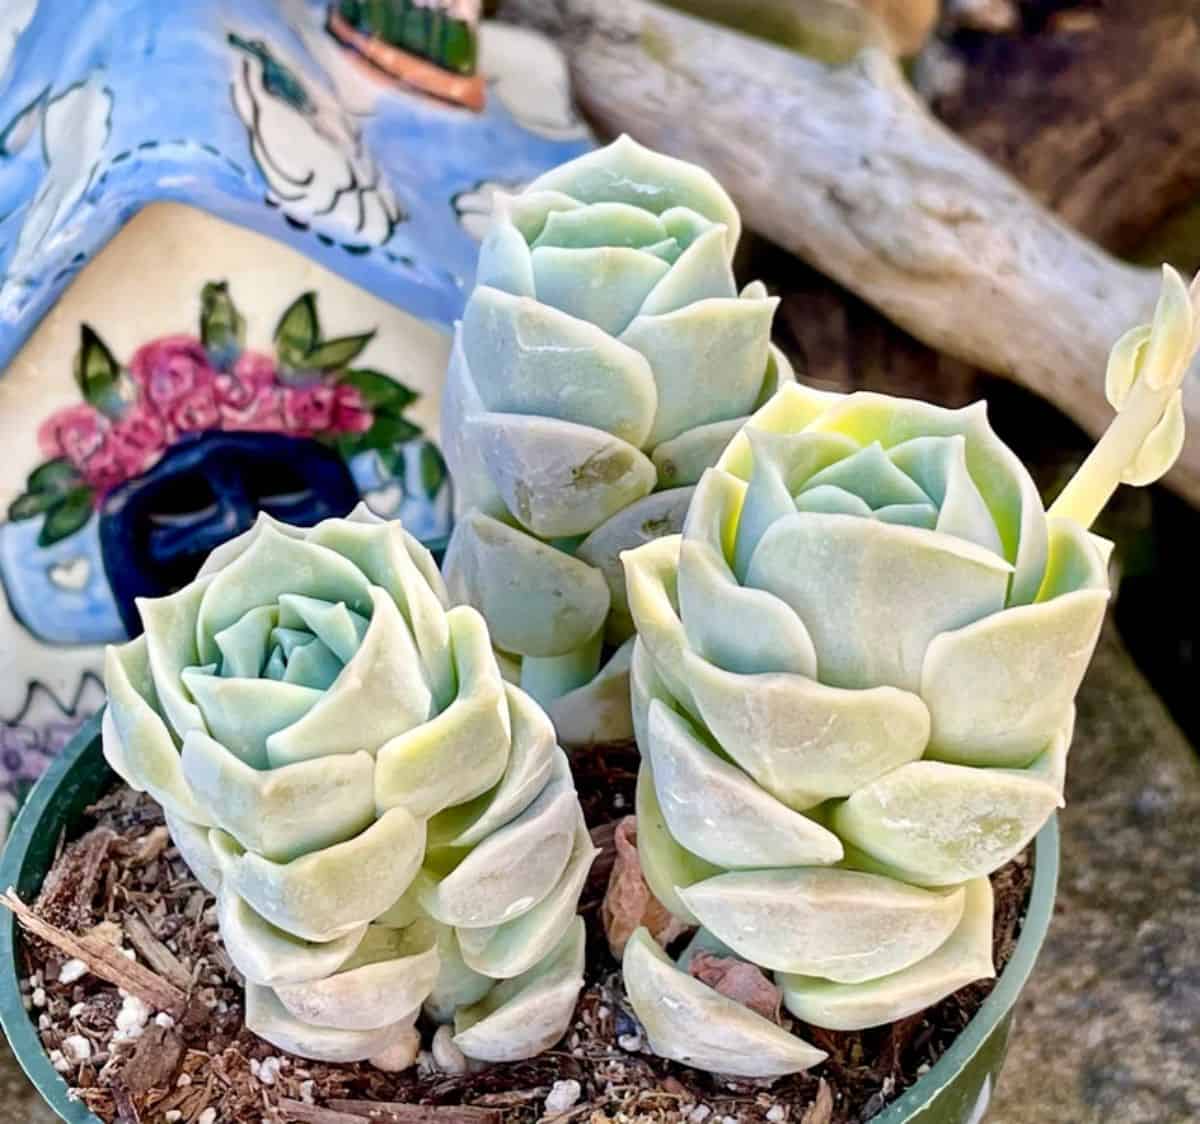 Graptoveria lovely rose in a green pot.